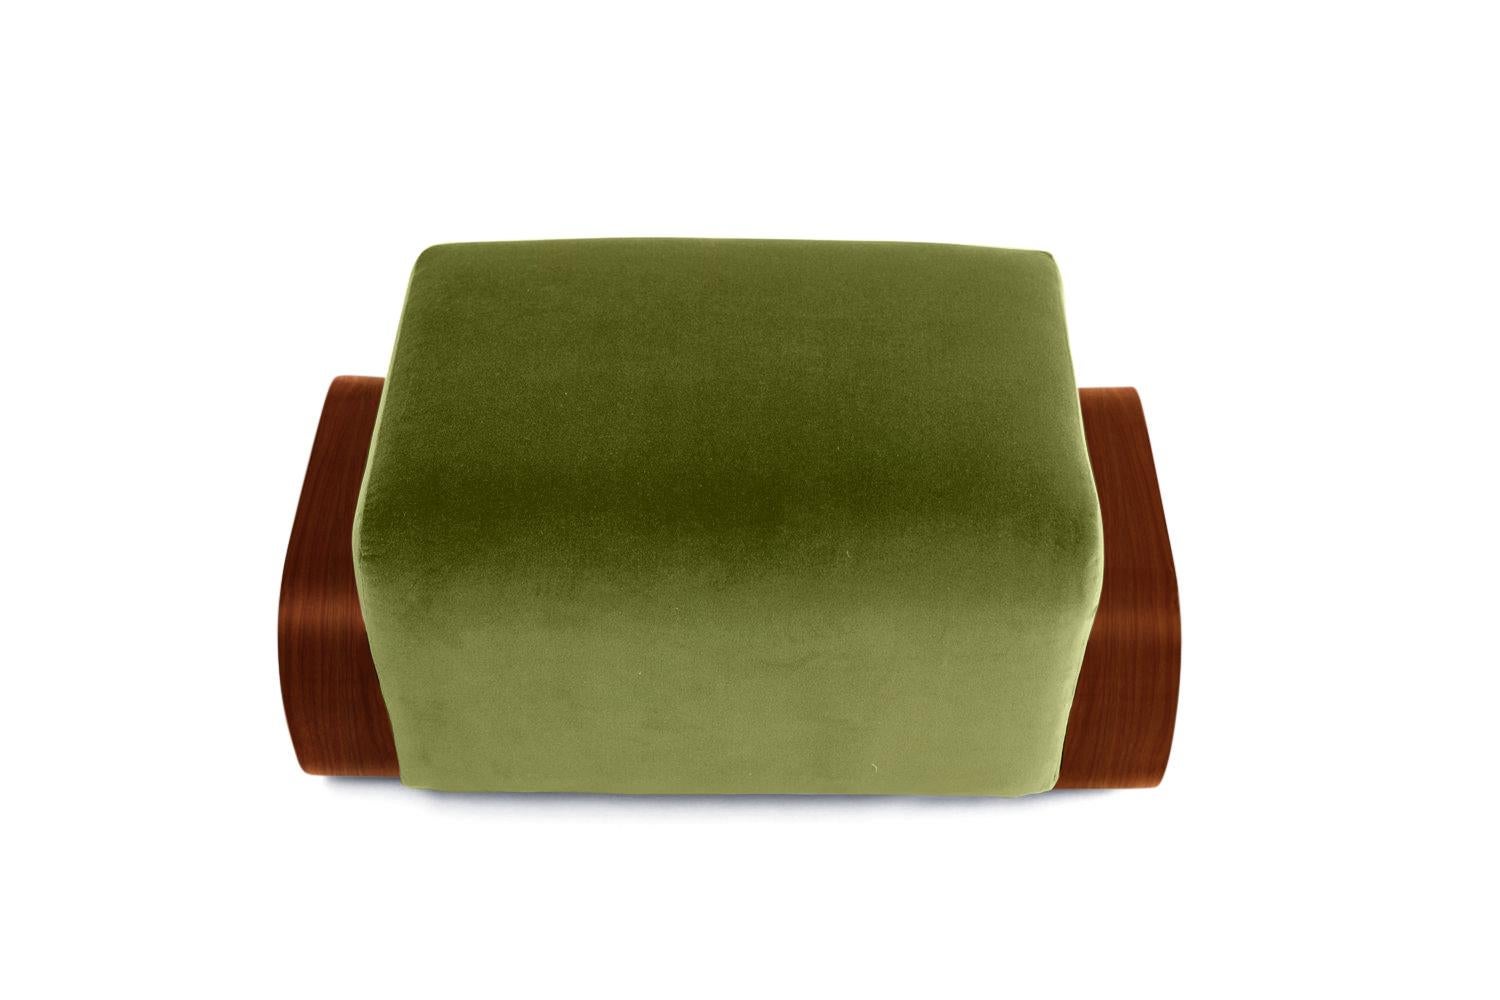 The Cayenne lounge chair and Ottoman are a deft homage to midcentury design. Designer Marie Burgos has taken the clean lines that defined seating designs of that era and given them a luxurious new simplicity. The plush upholstery — available in a